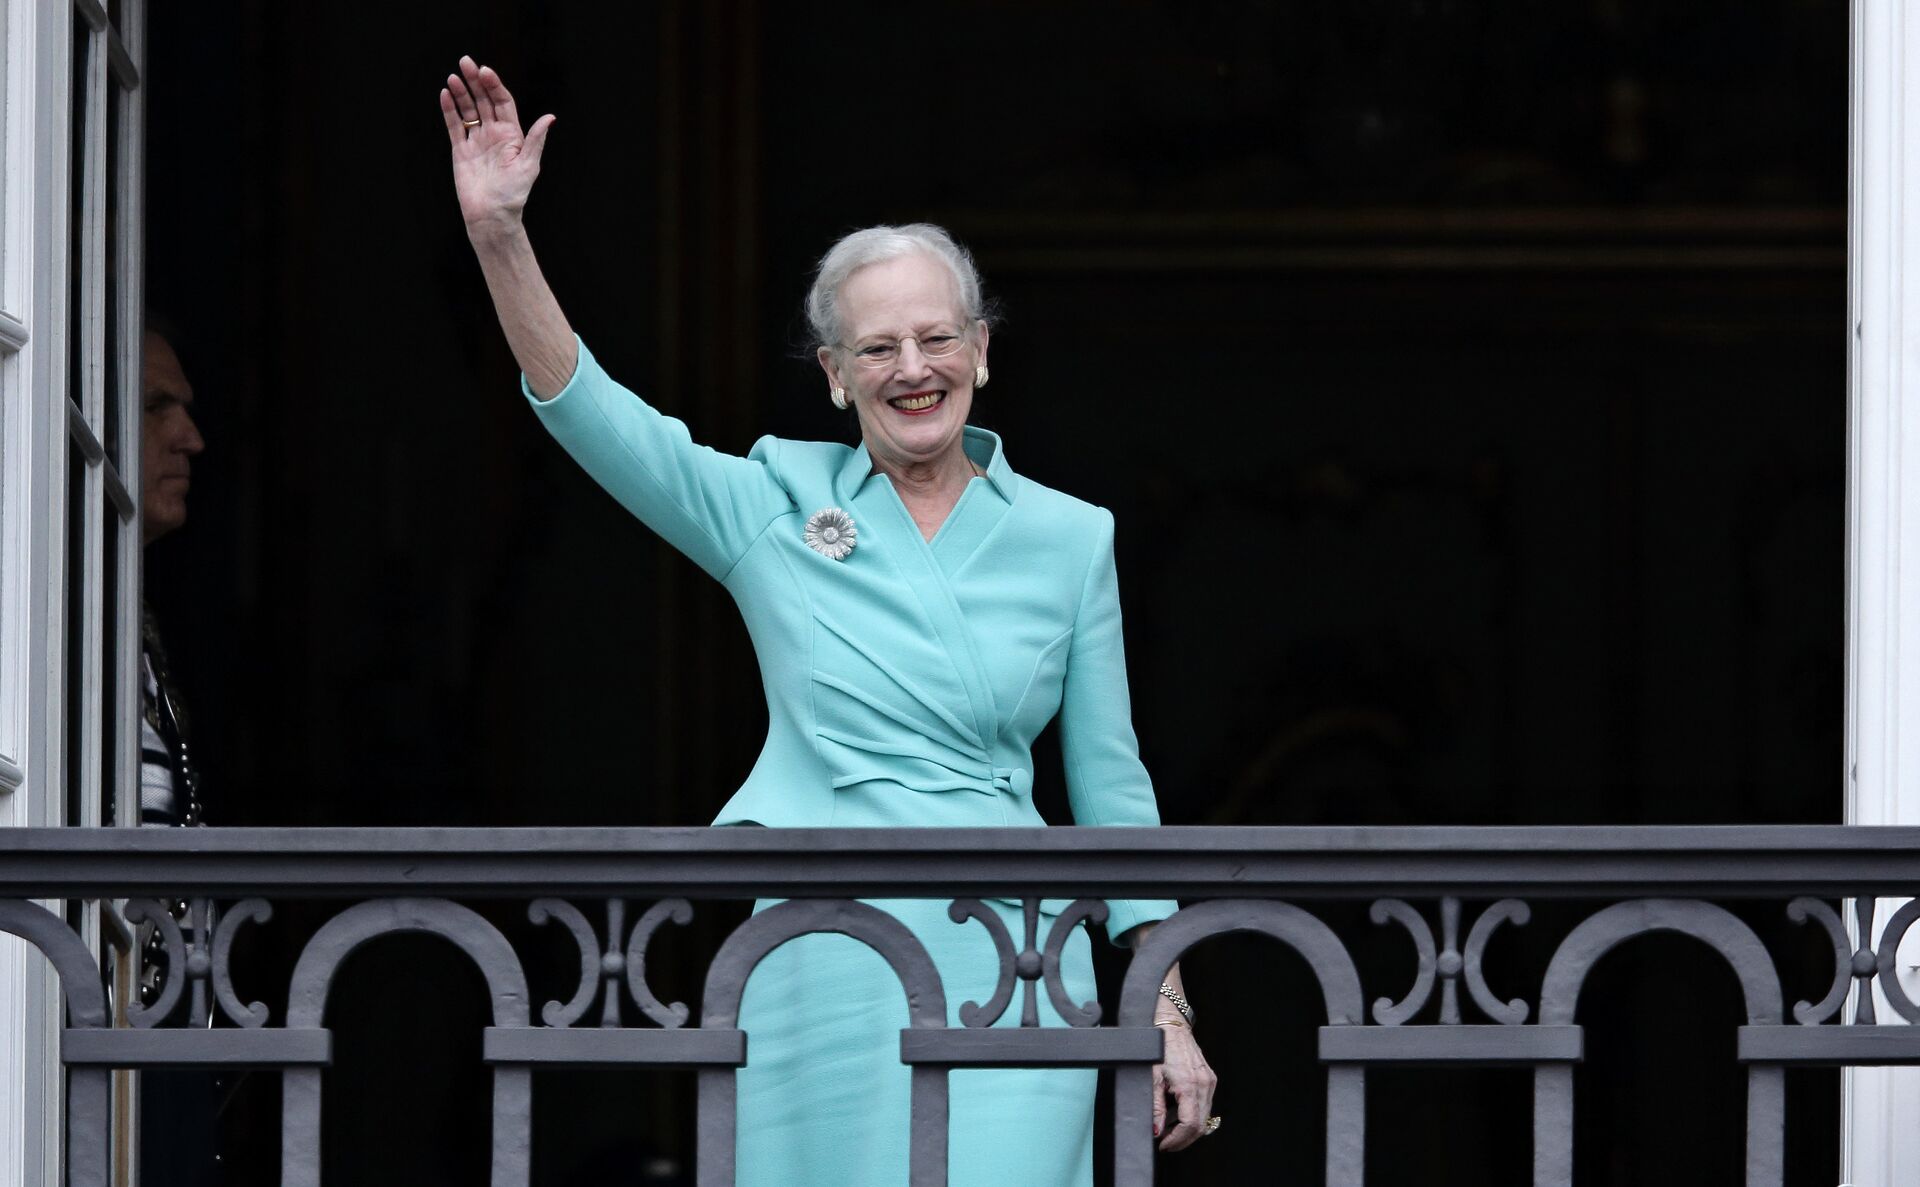 The Queen of Denmark, Margrethe II celebrates her 75th birthday on the balcony looking out at the crowd below, at Christian VII’s Palace, Amalienborg, Thursday, April 16 2015. - Sputnik International, 1920, 20.02.2022